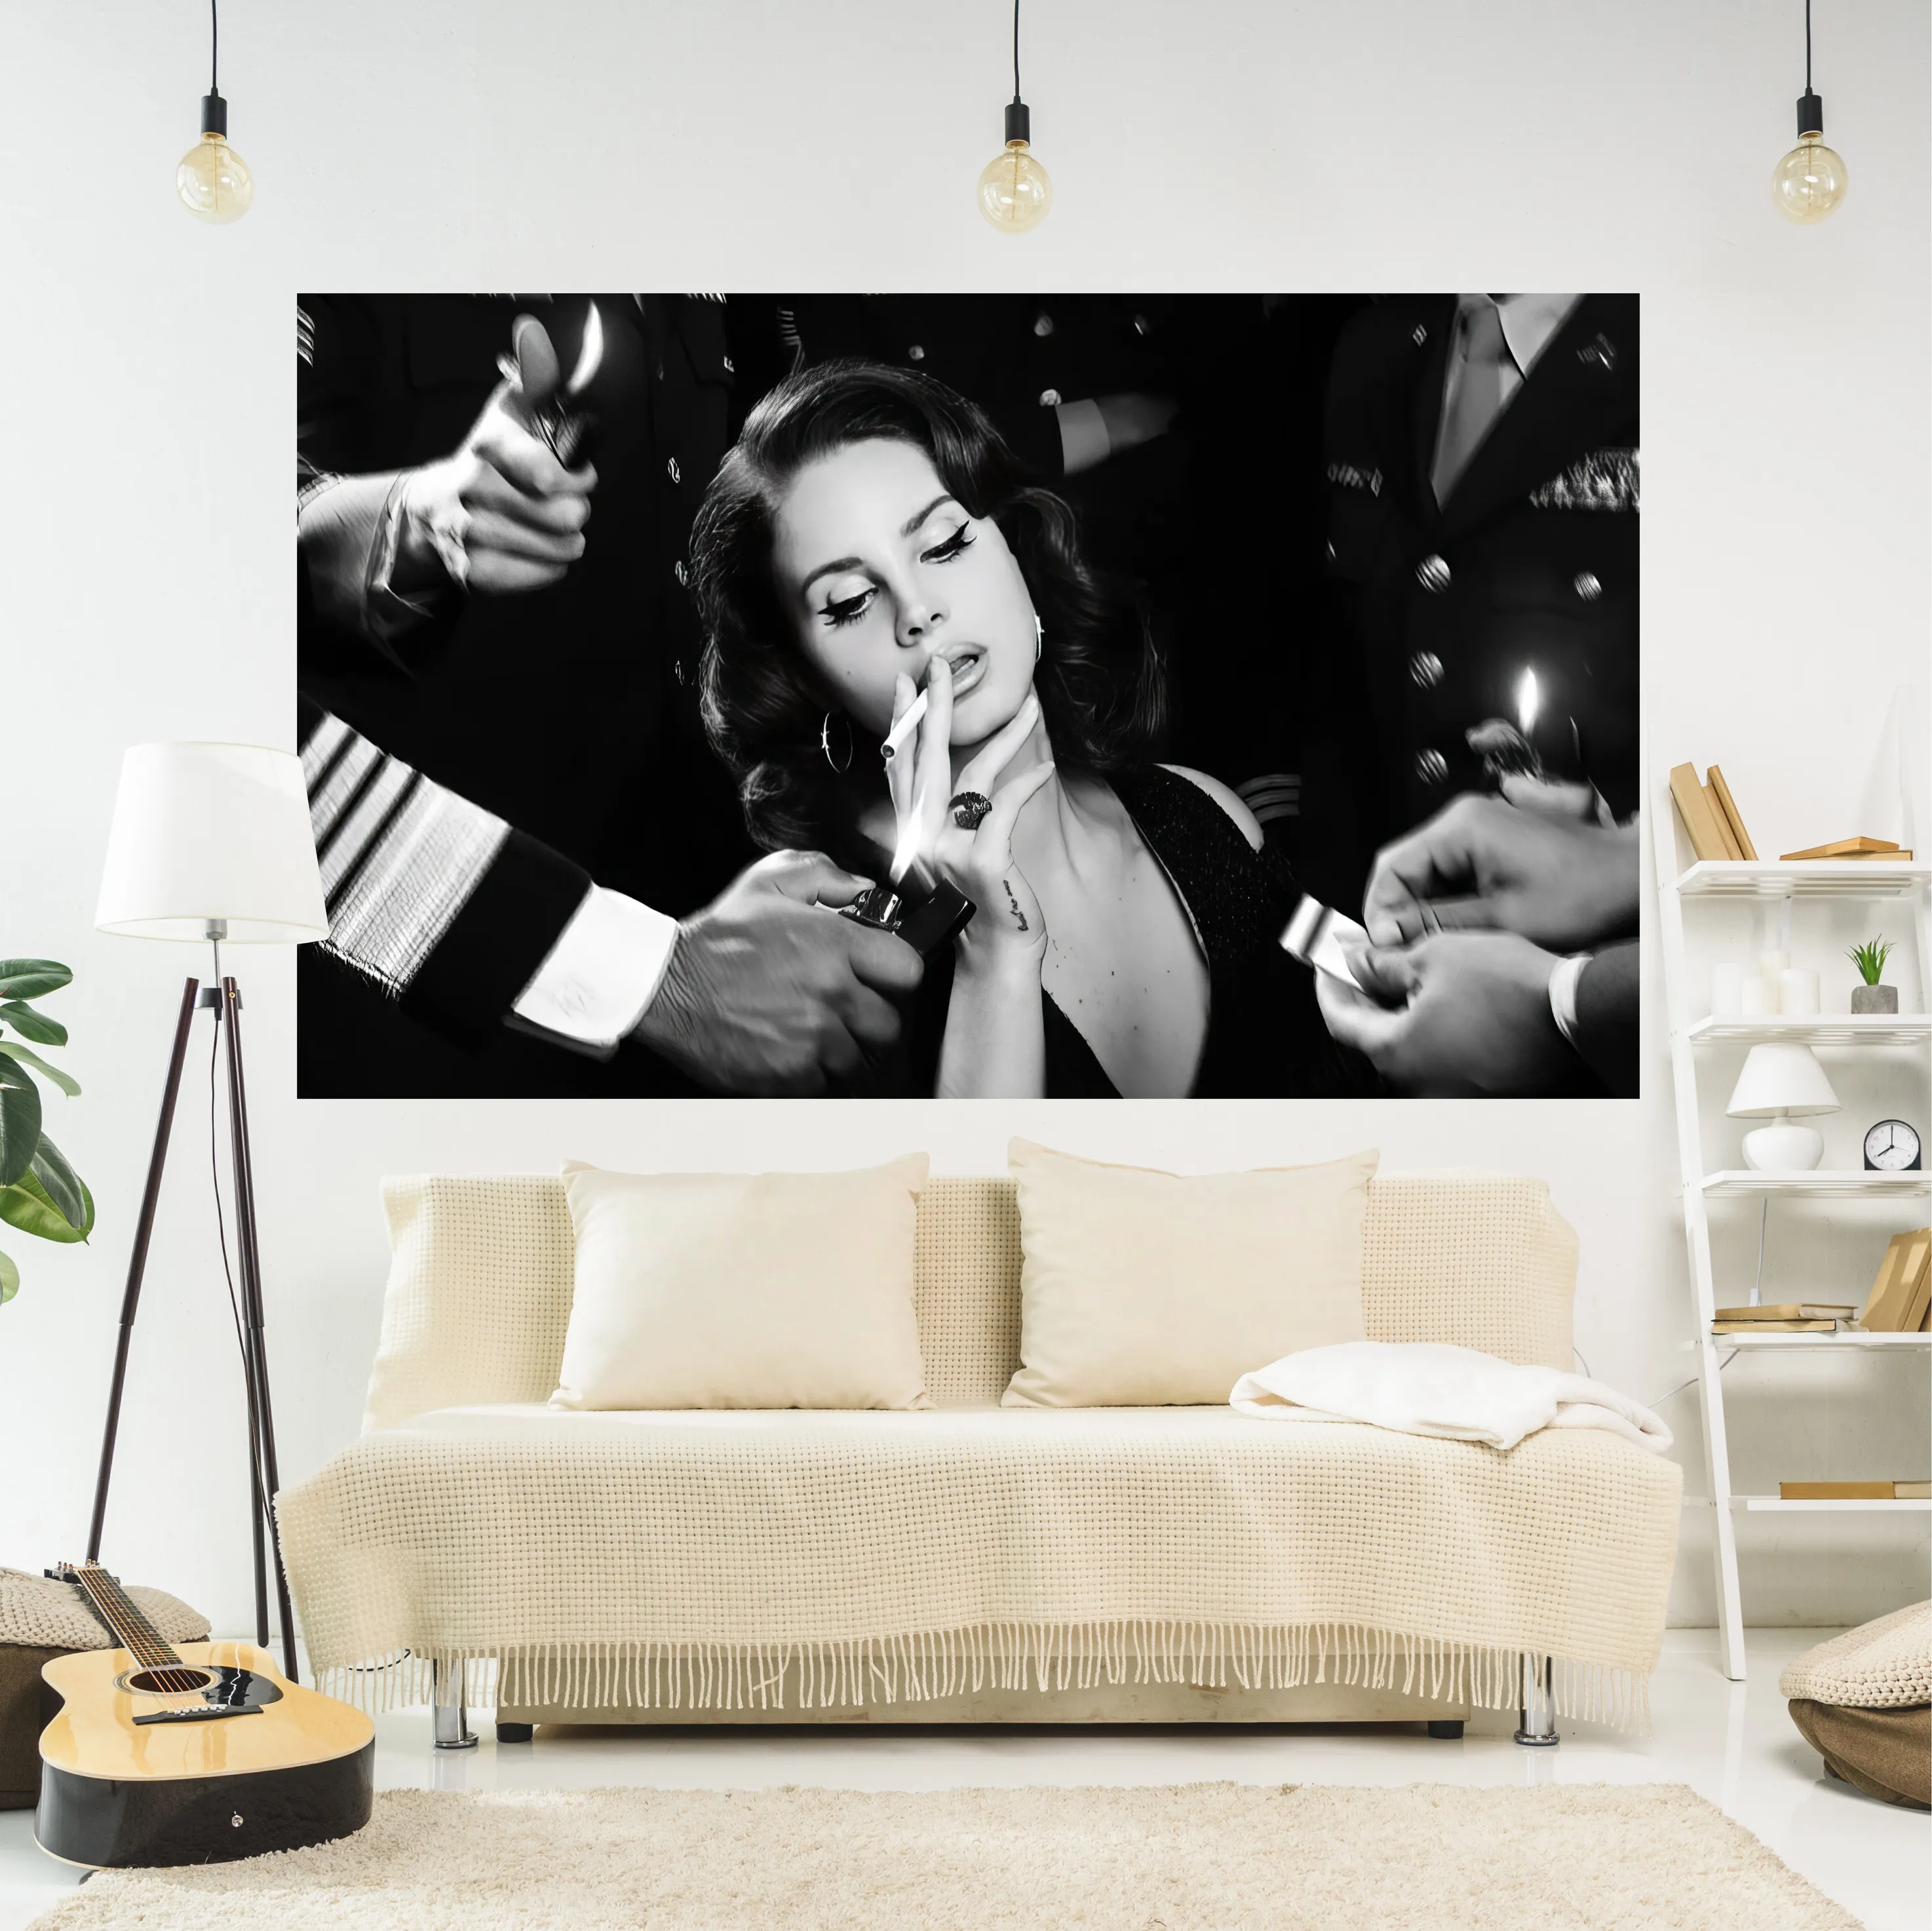 XxDeco Lana Del Rey Poster Tapestry Wall Decor Hippie Rapper Smoking Printed Art Aesthetic Bedroom Or Home For Decoration